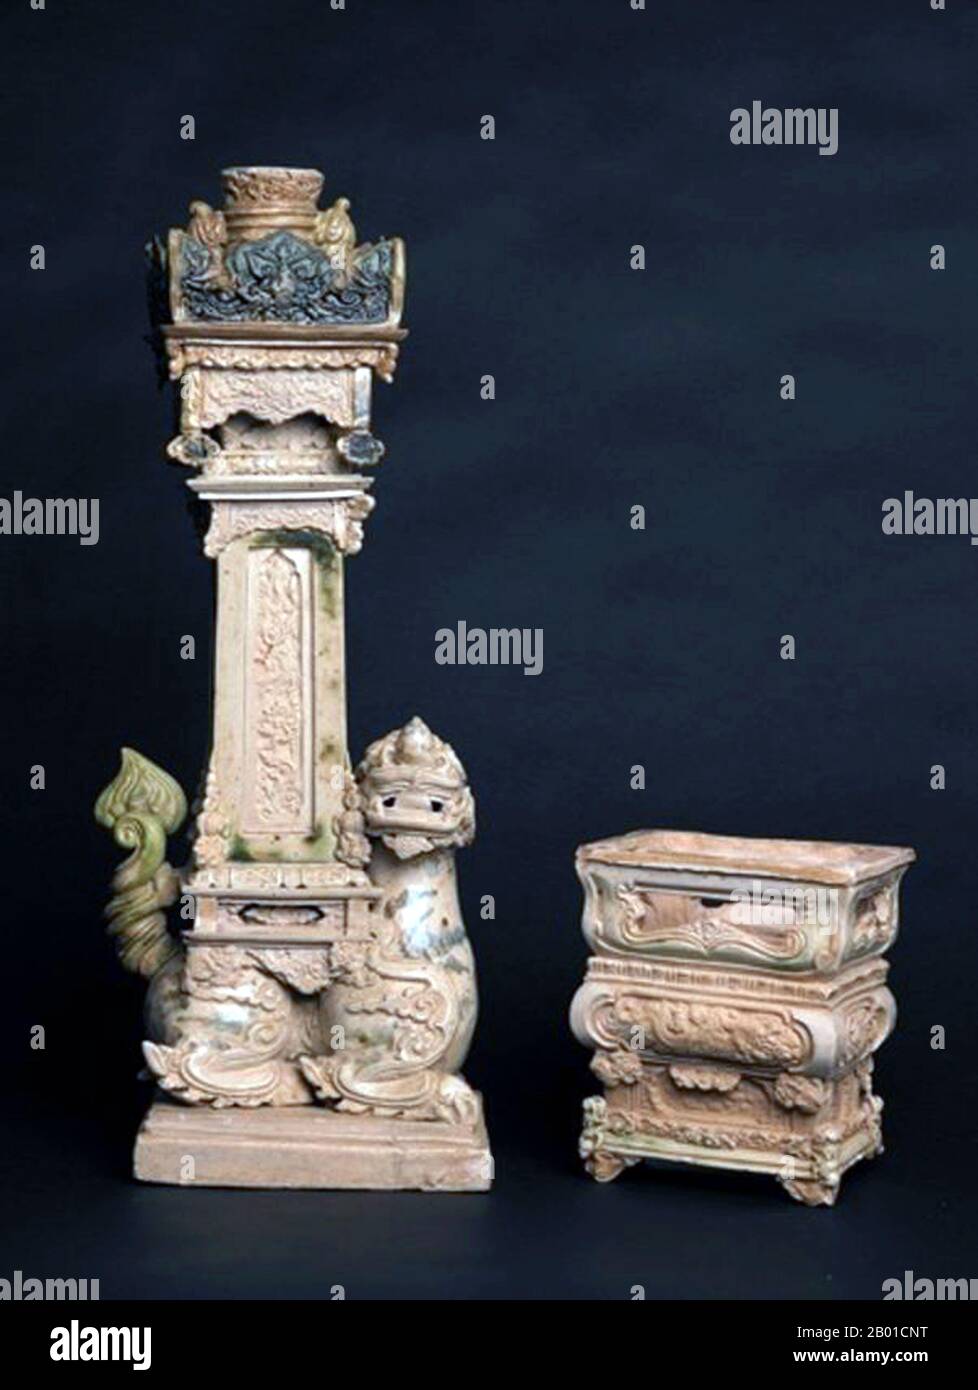 Vietnam: Altar pieces consisting of a large candle holder with a mythical beast sitting on a plinth with a tall pedestal upon its back. Later Lê Dynasty (1533-1788).  The top of the pedestal contains a rectangular platform with elegantly carved protrusions surrounding a round candle receptacle.   The attendant censer is in the style of bronze pieces of the era and sits on a reticulated pedestal base, sharing many of the same decorative touches of the candle-holder. Stock Photo